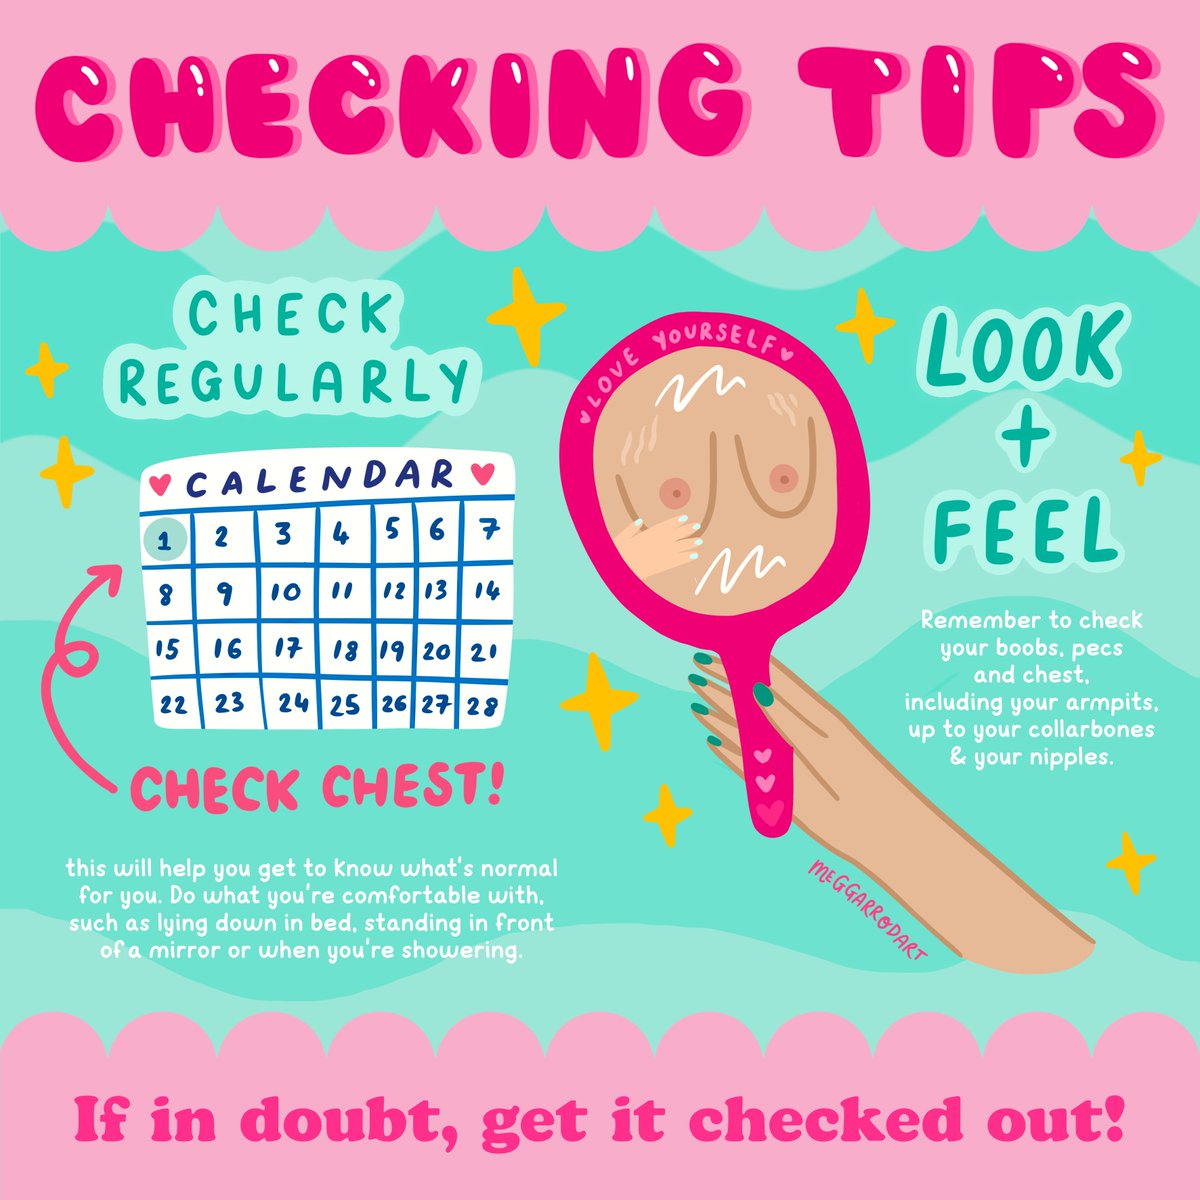 Look, Feel and Touch. Getting to know your normal is as easy as that. If in doubt, get it checked out. For checking guidance hit the link bit.ly/45nXQQs 🎨 @meggarrodart